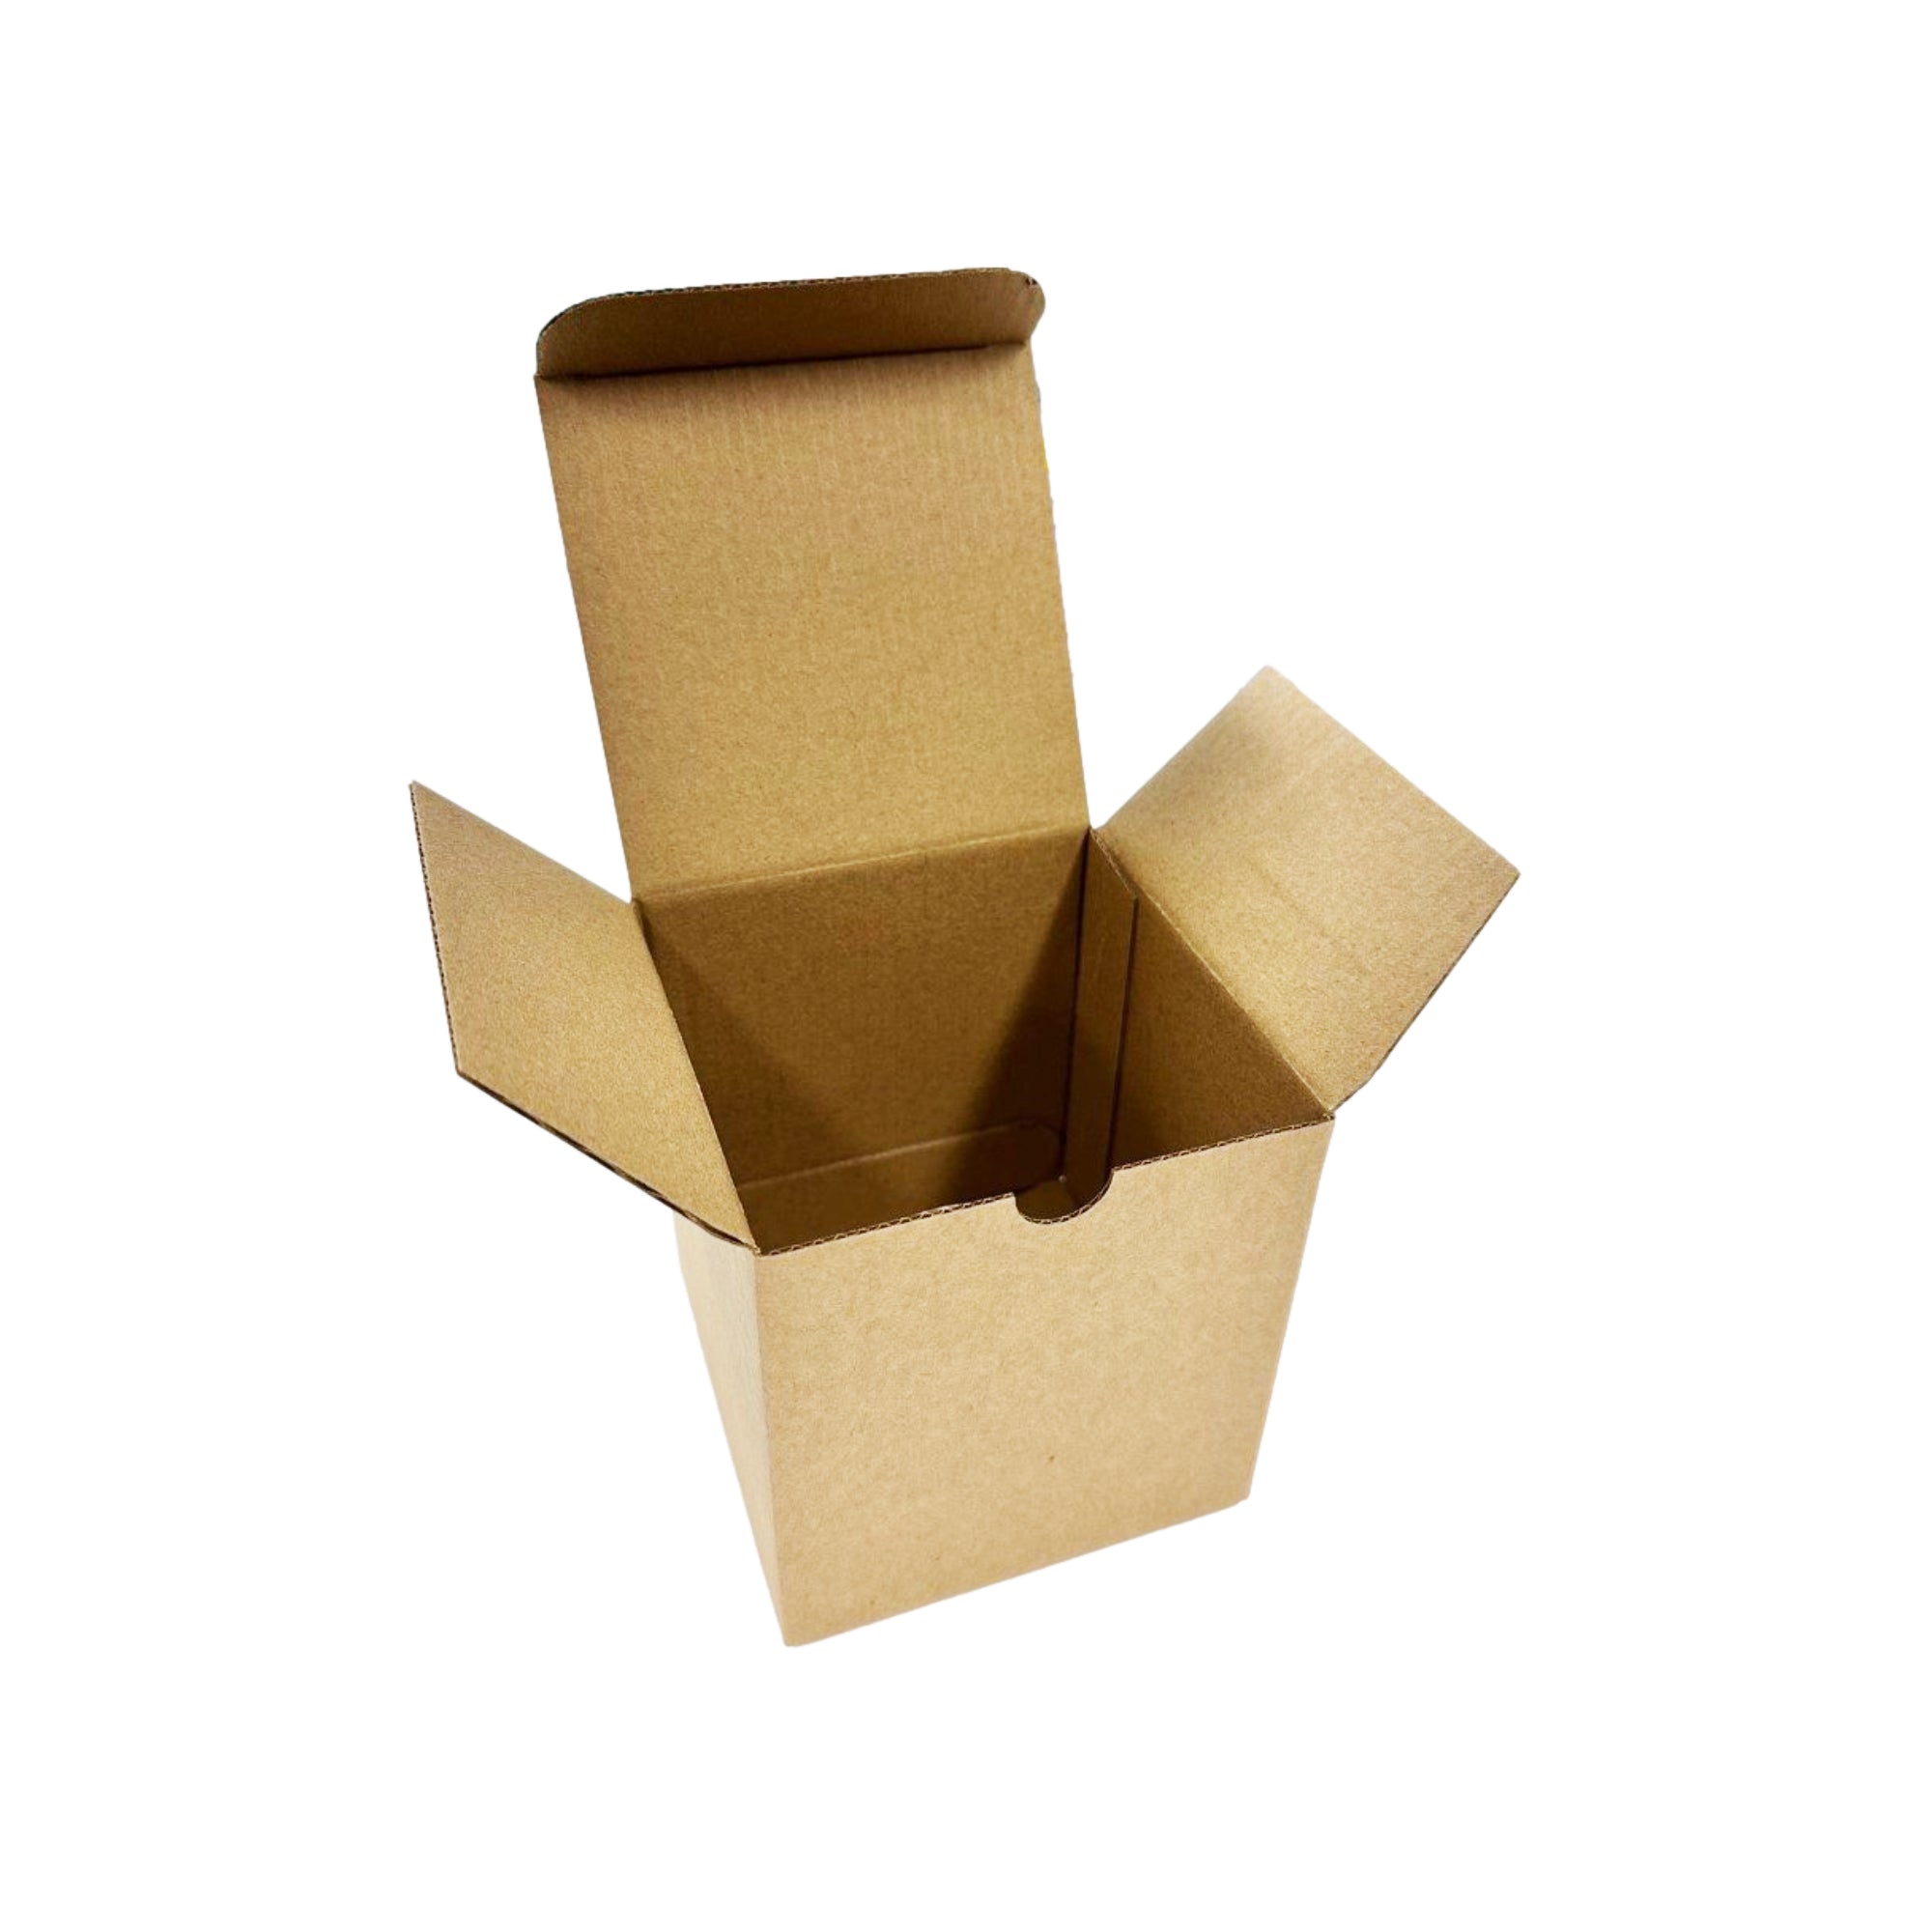 Packaging Used for Candle Box Businesses